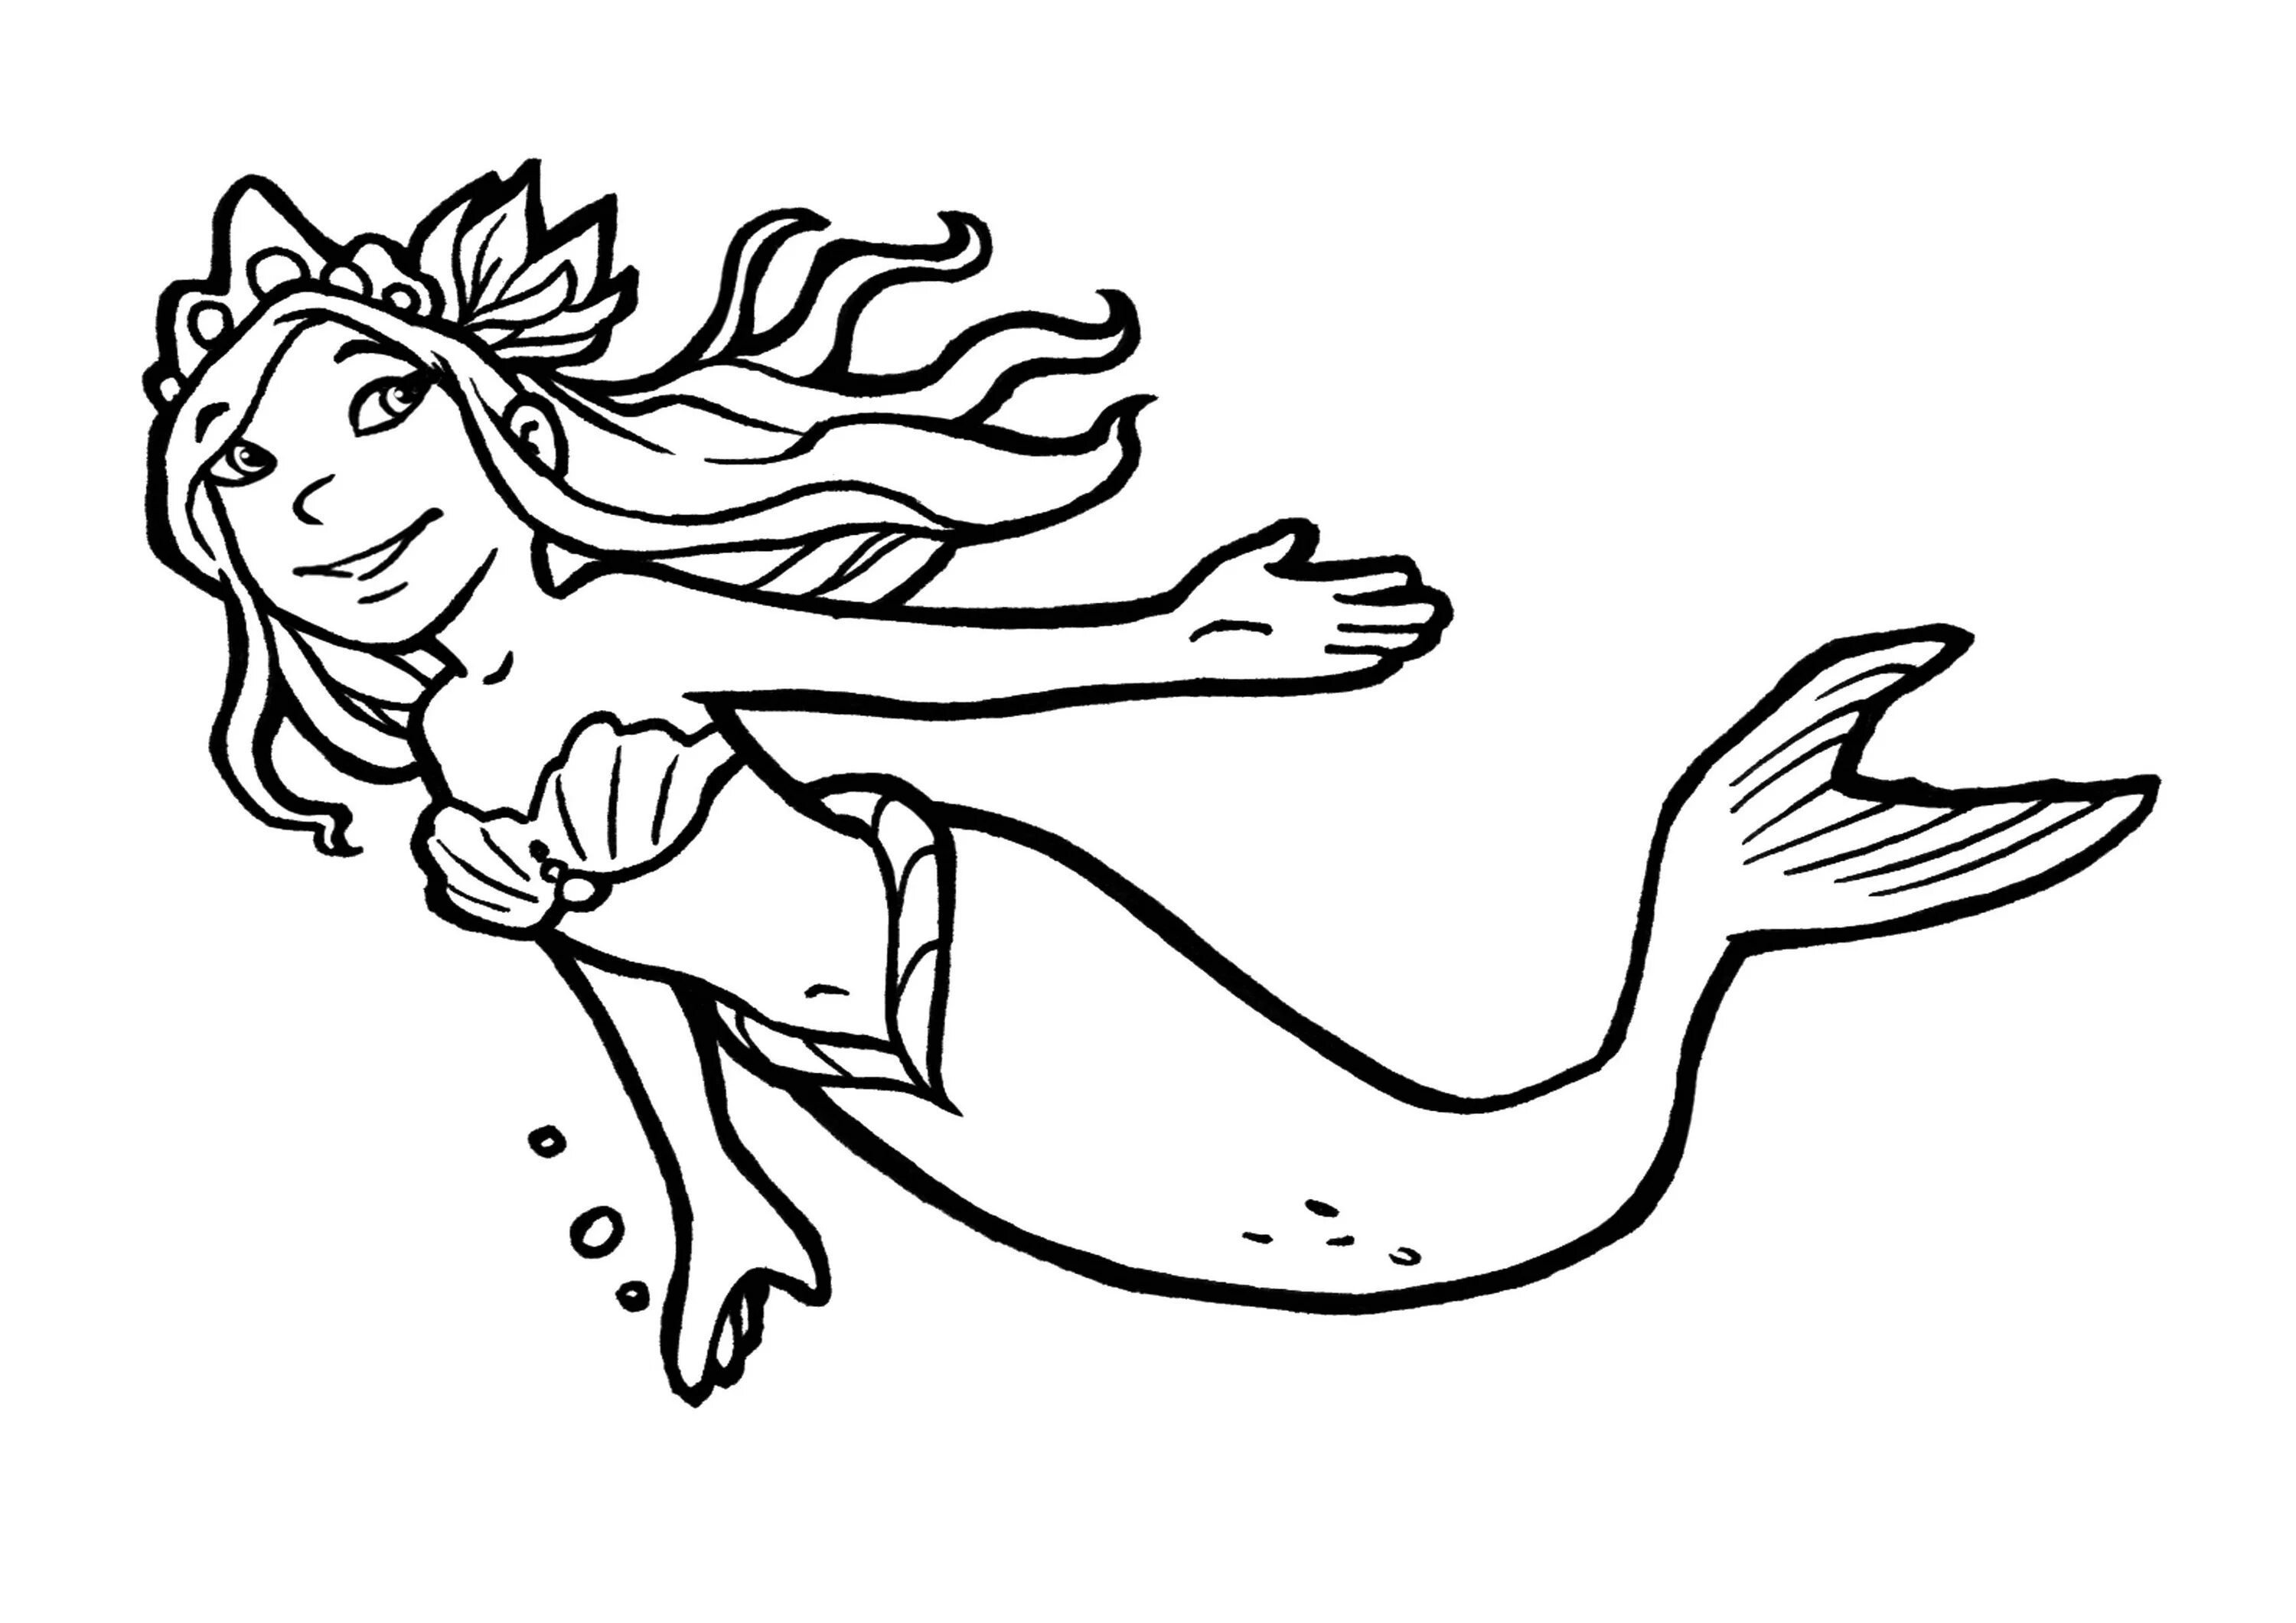 Glowing mermaid queen coloring page